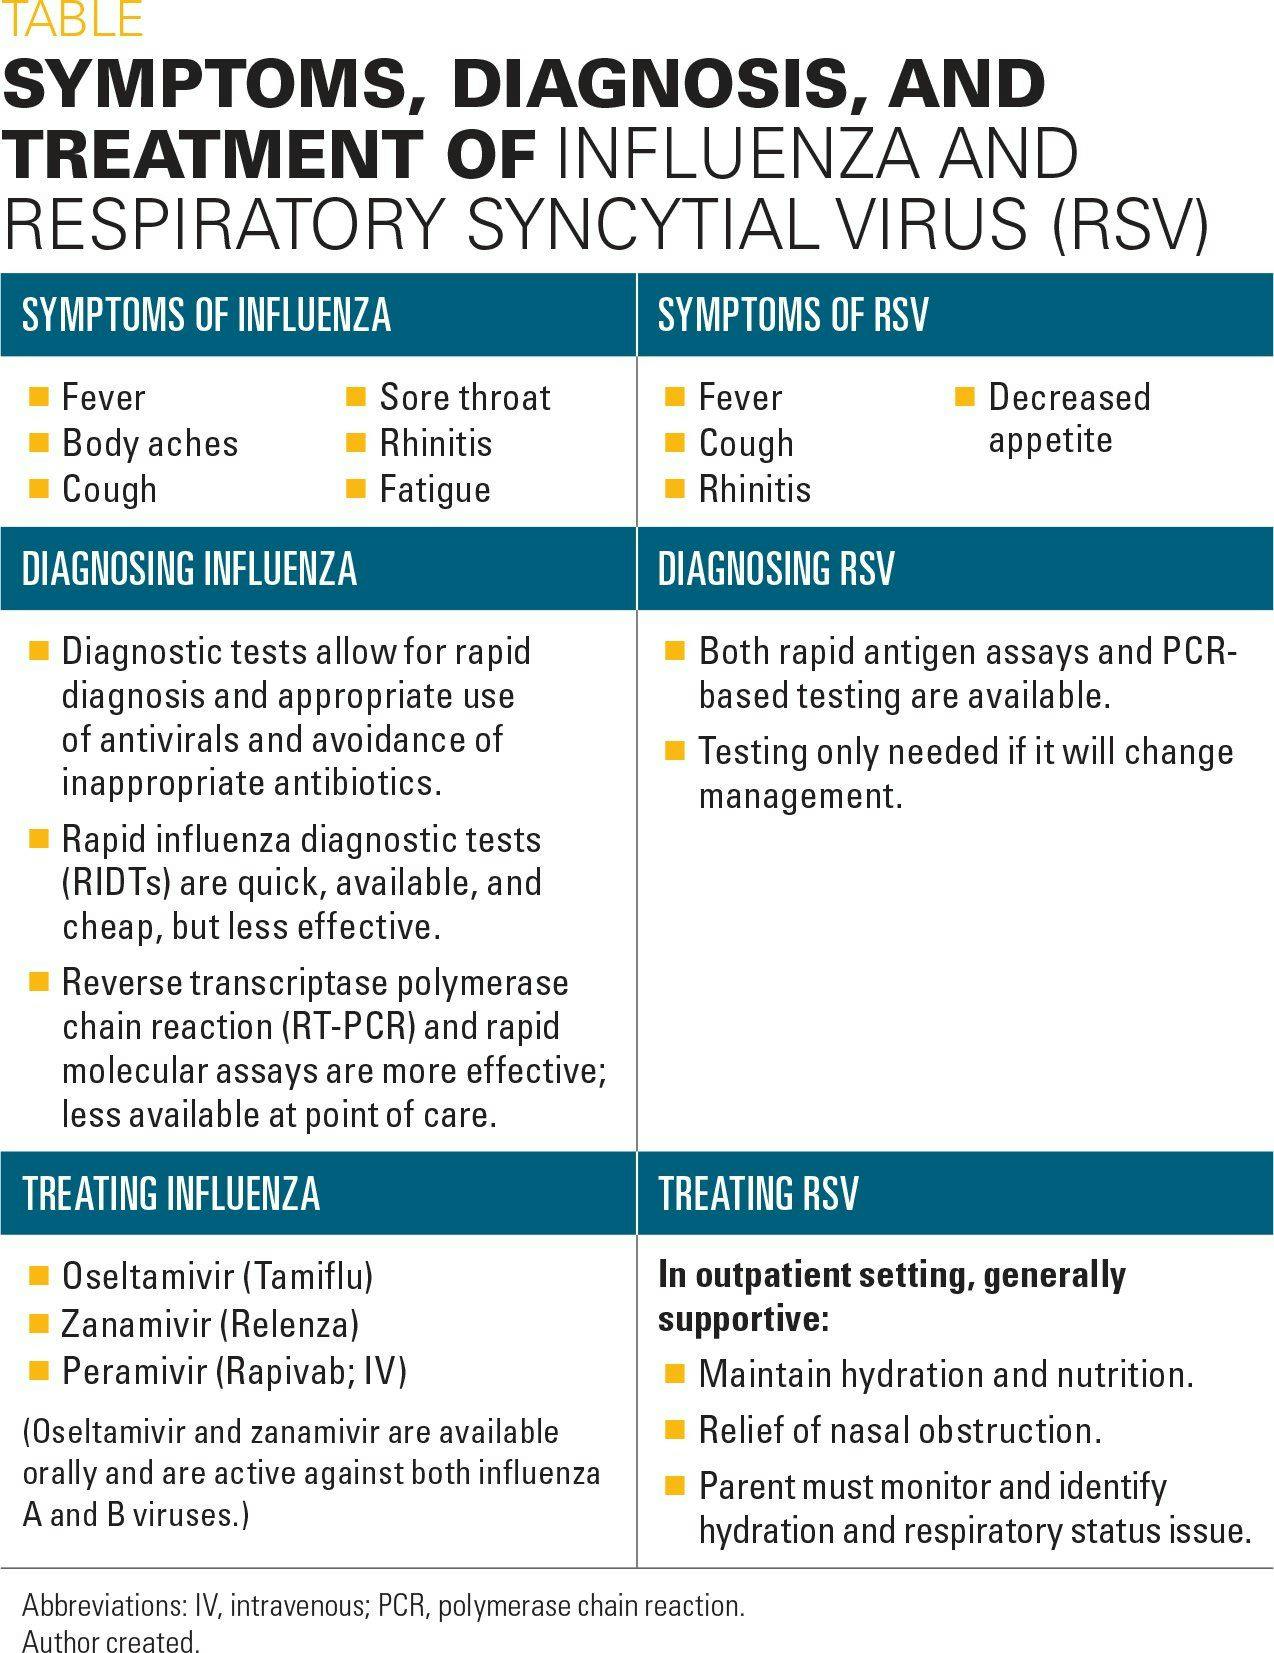 Symptoms, diagnosis, and treatment of influenza and respiratory syncytial virus (RSV)